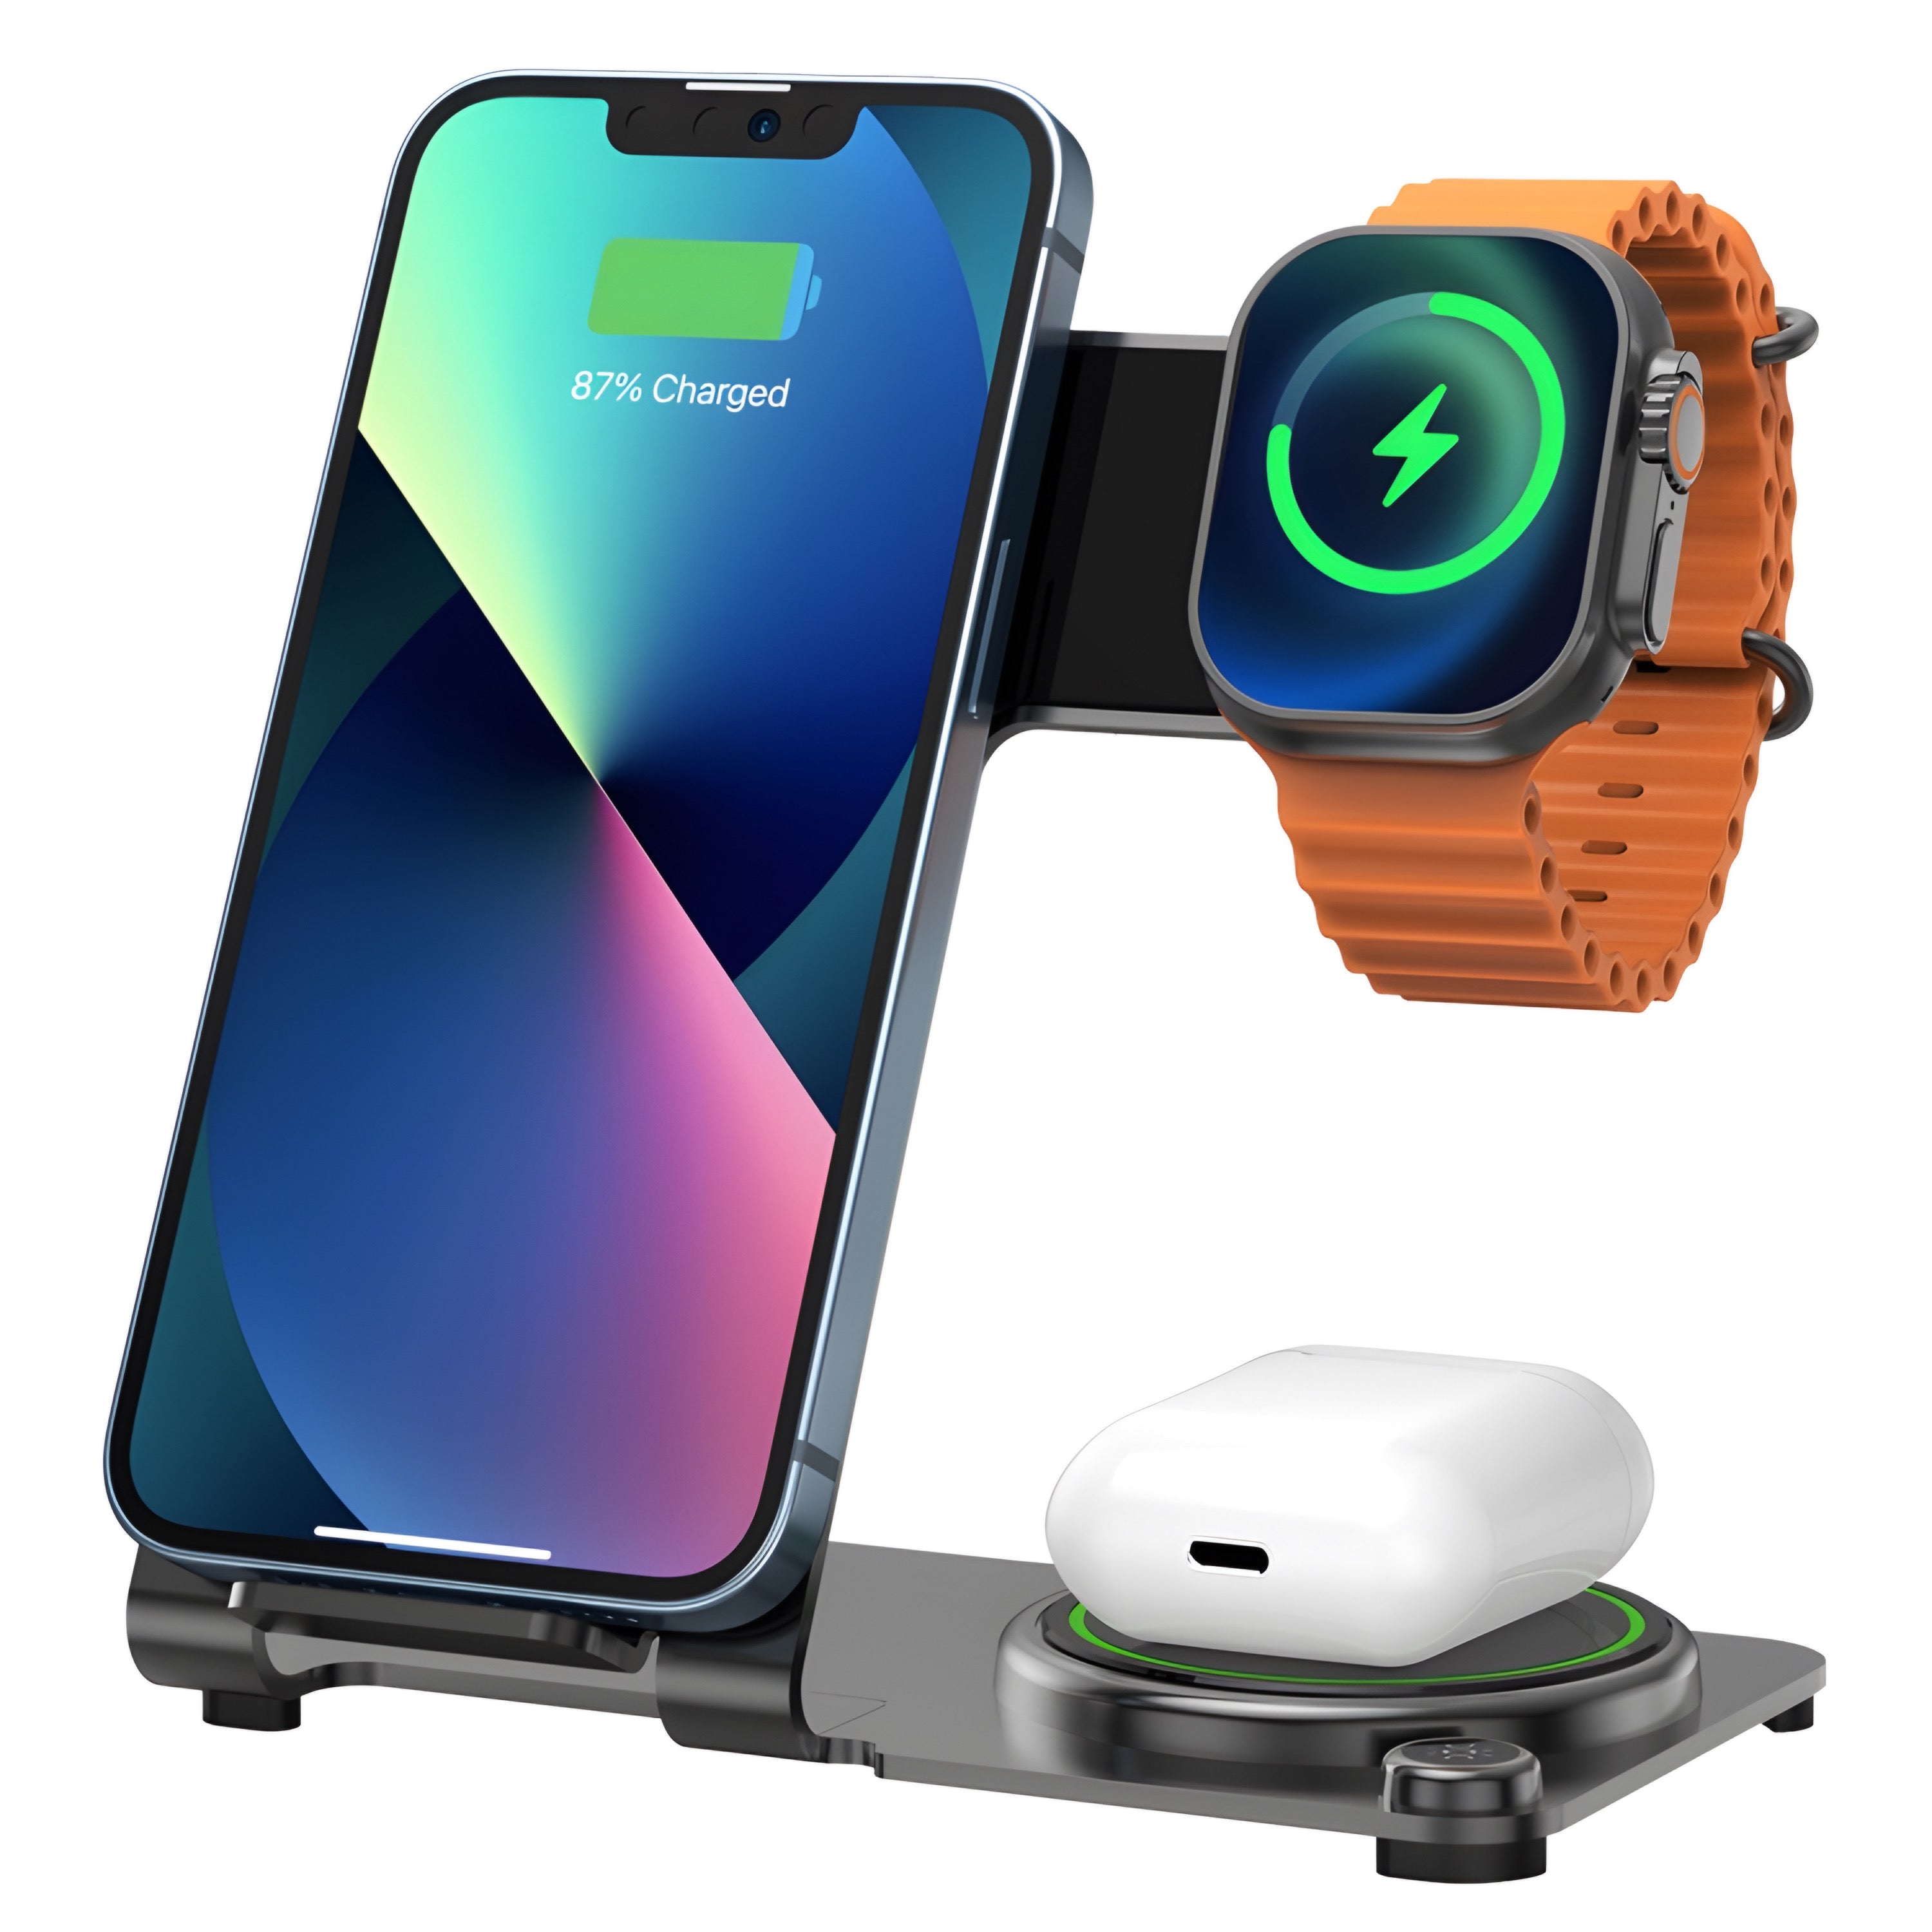 Wiwu 3-in-1 Wireless Charger - eShop Now